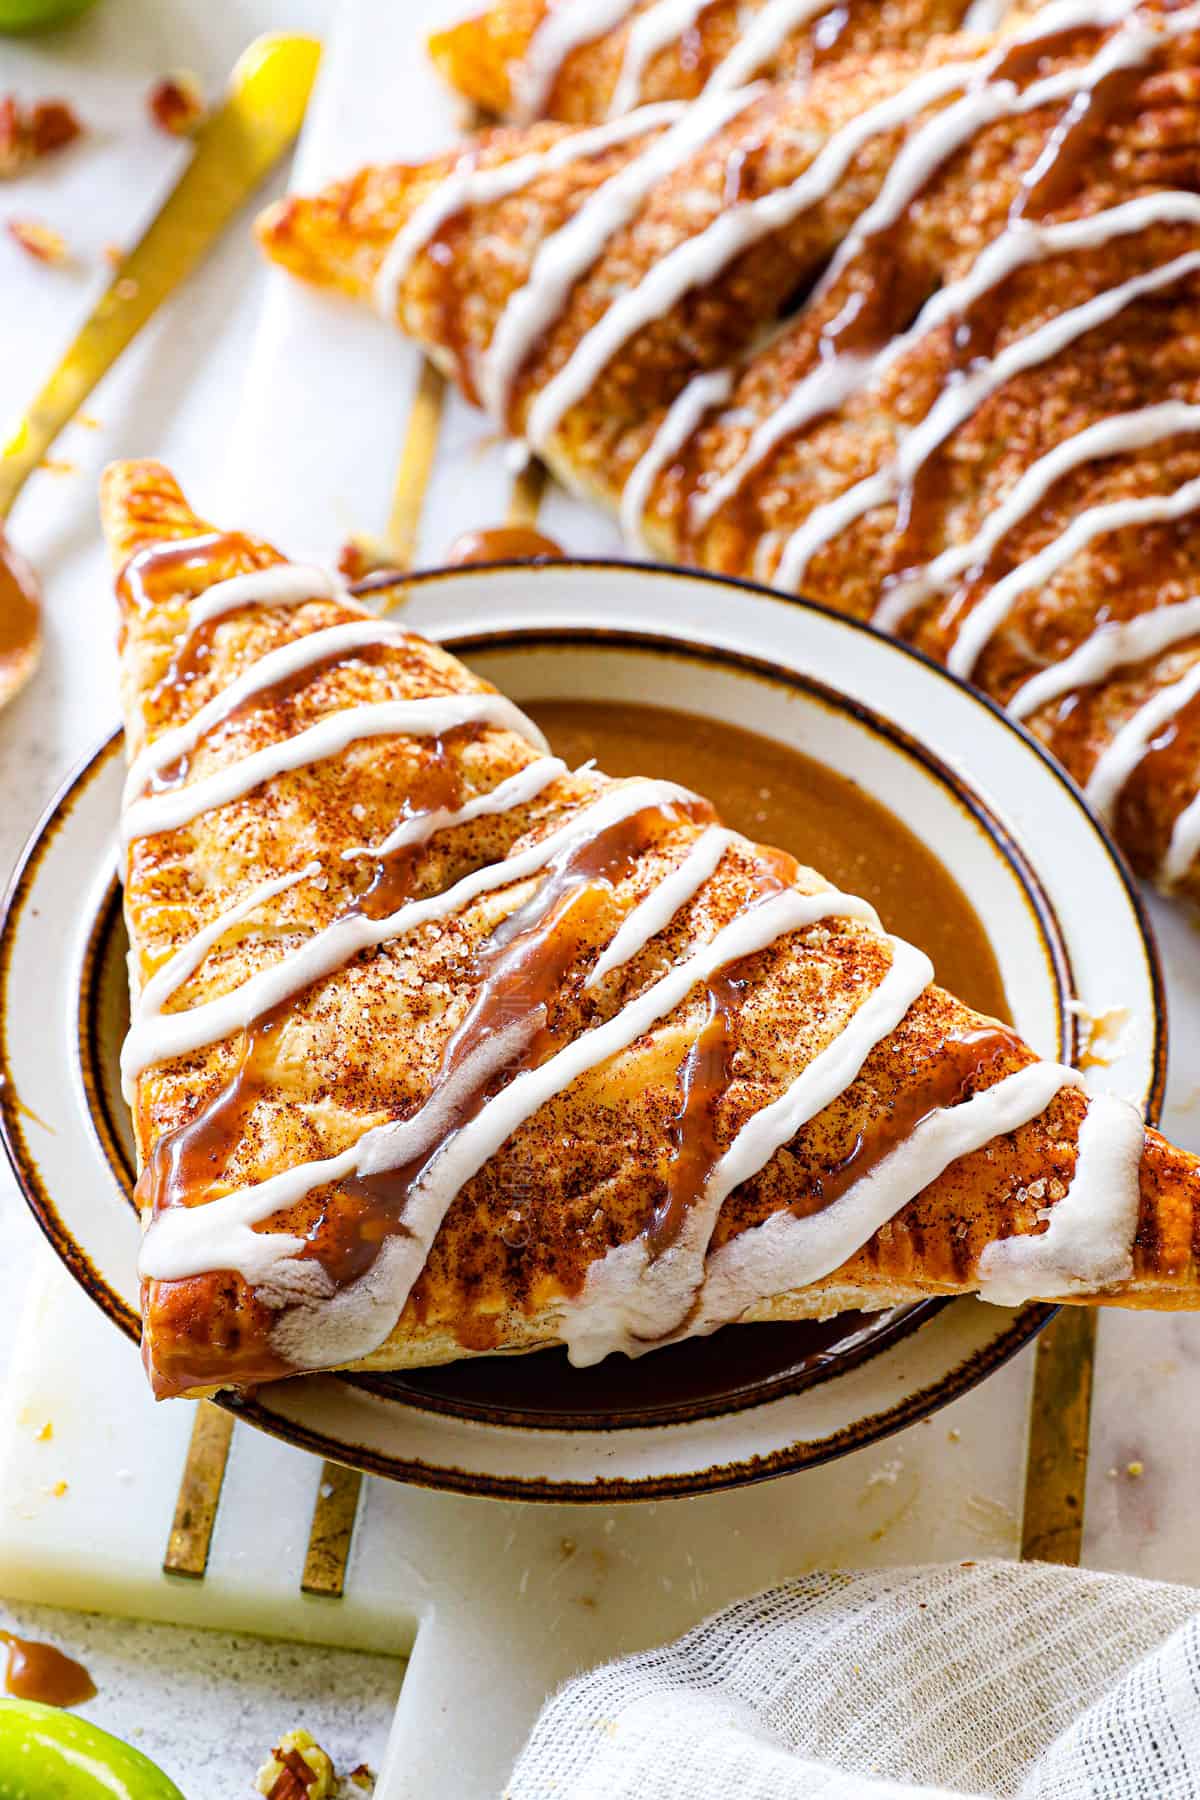 apple turnover being served with caramel sauce